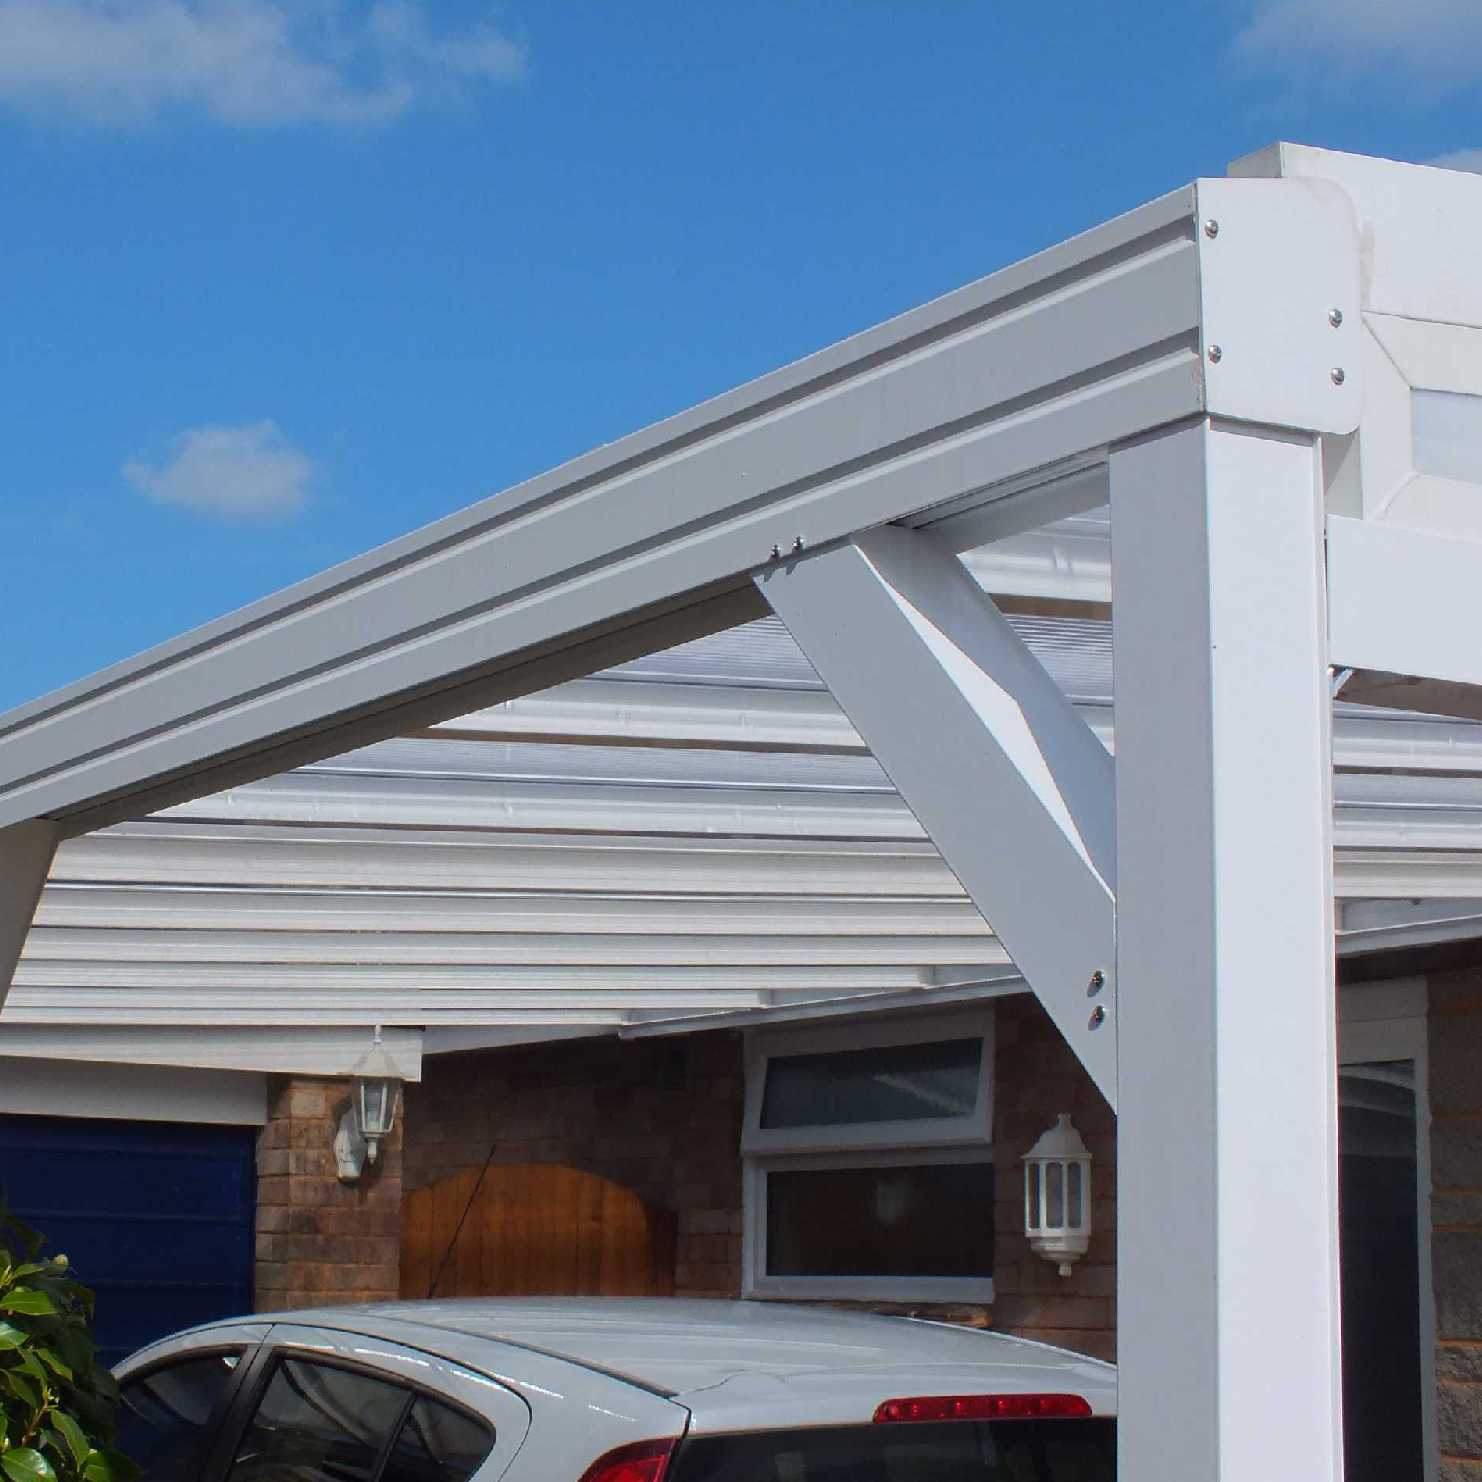 Buy Omega Smart Lean-To Canopy, White with 16mm Polycarbonate Glazing - 12.0m (W) x 3.0m (P), (5) Supporting Posts online today